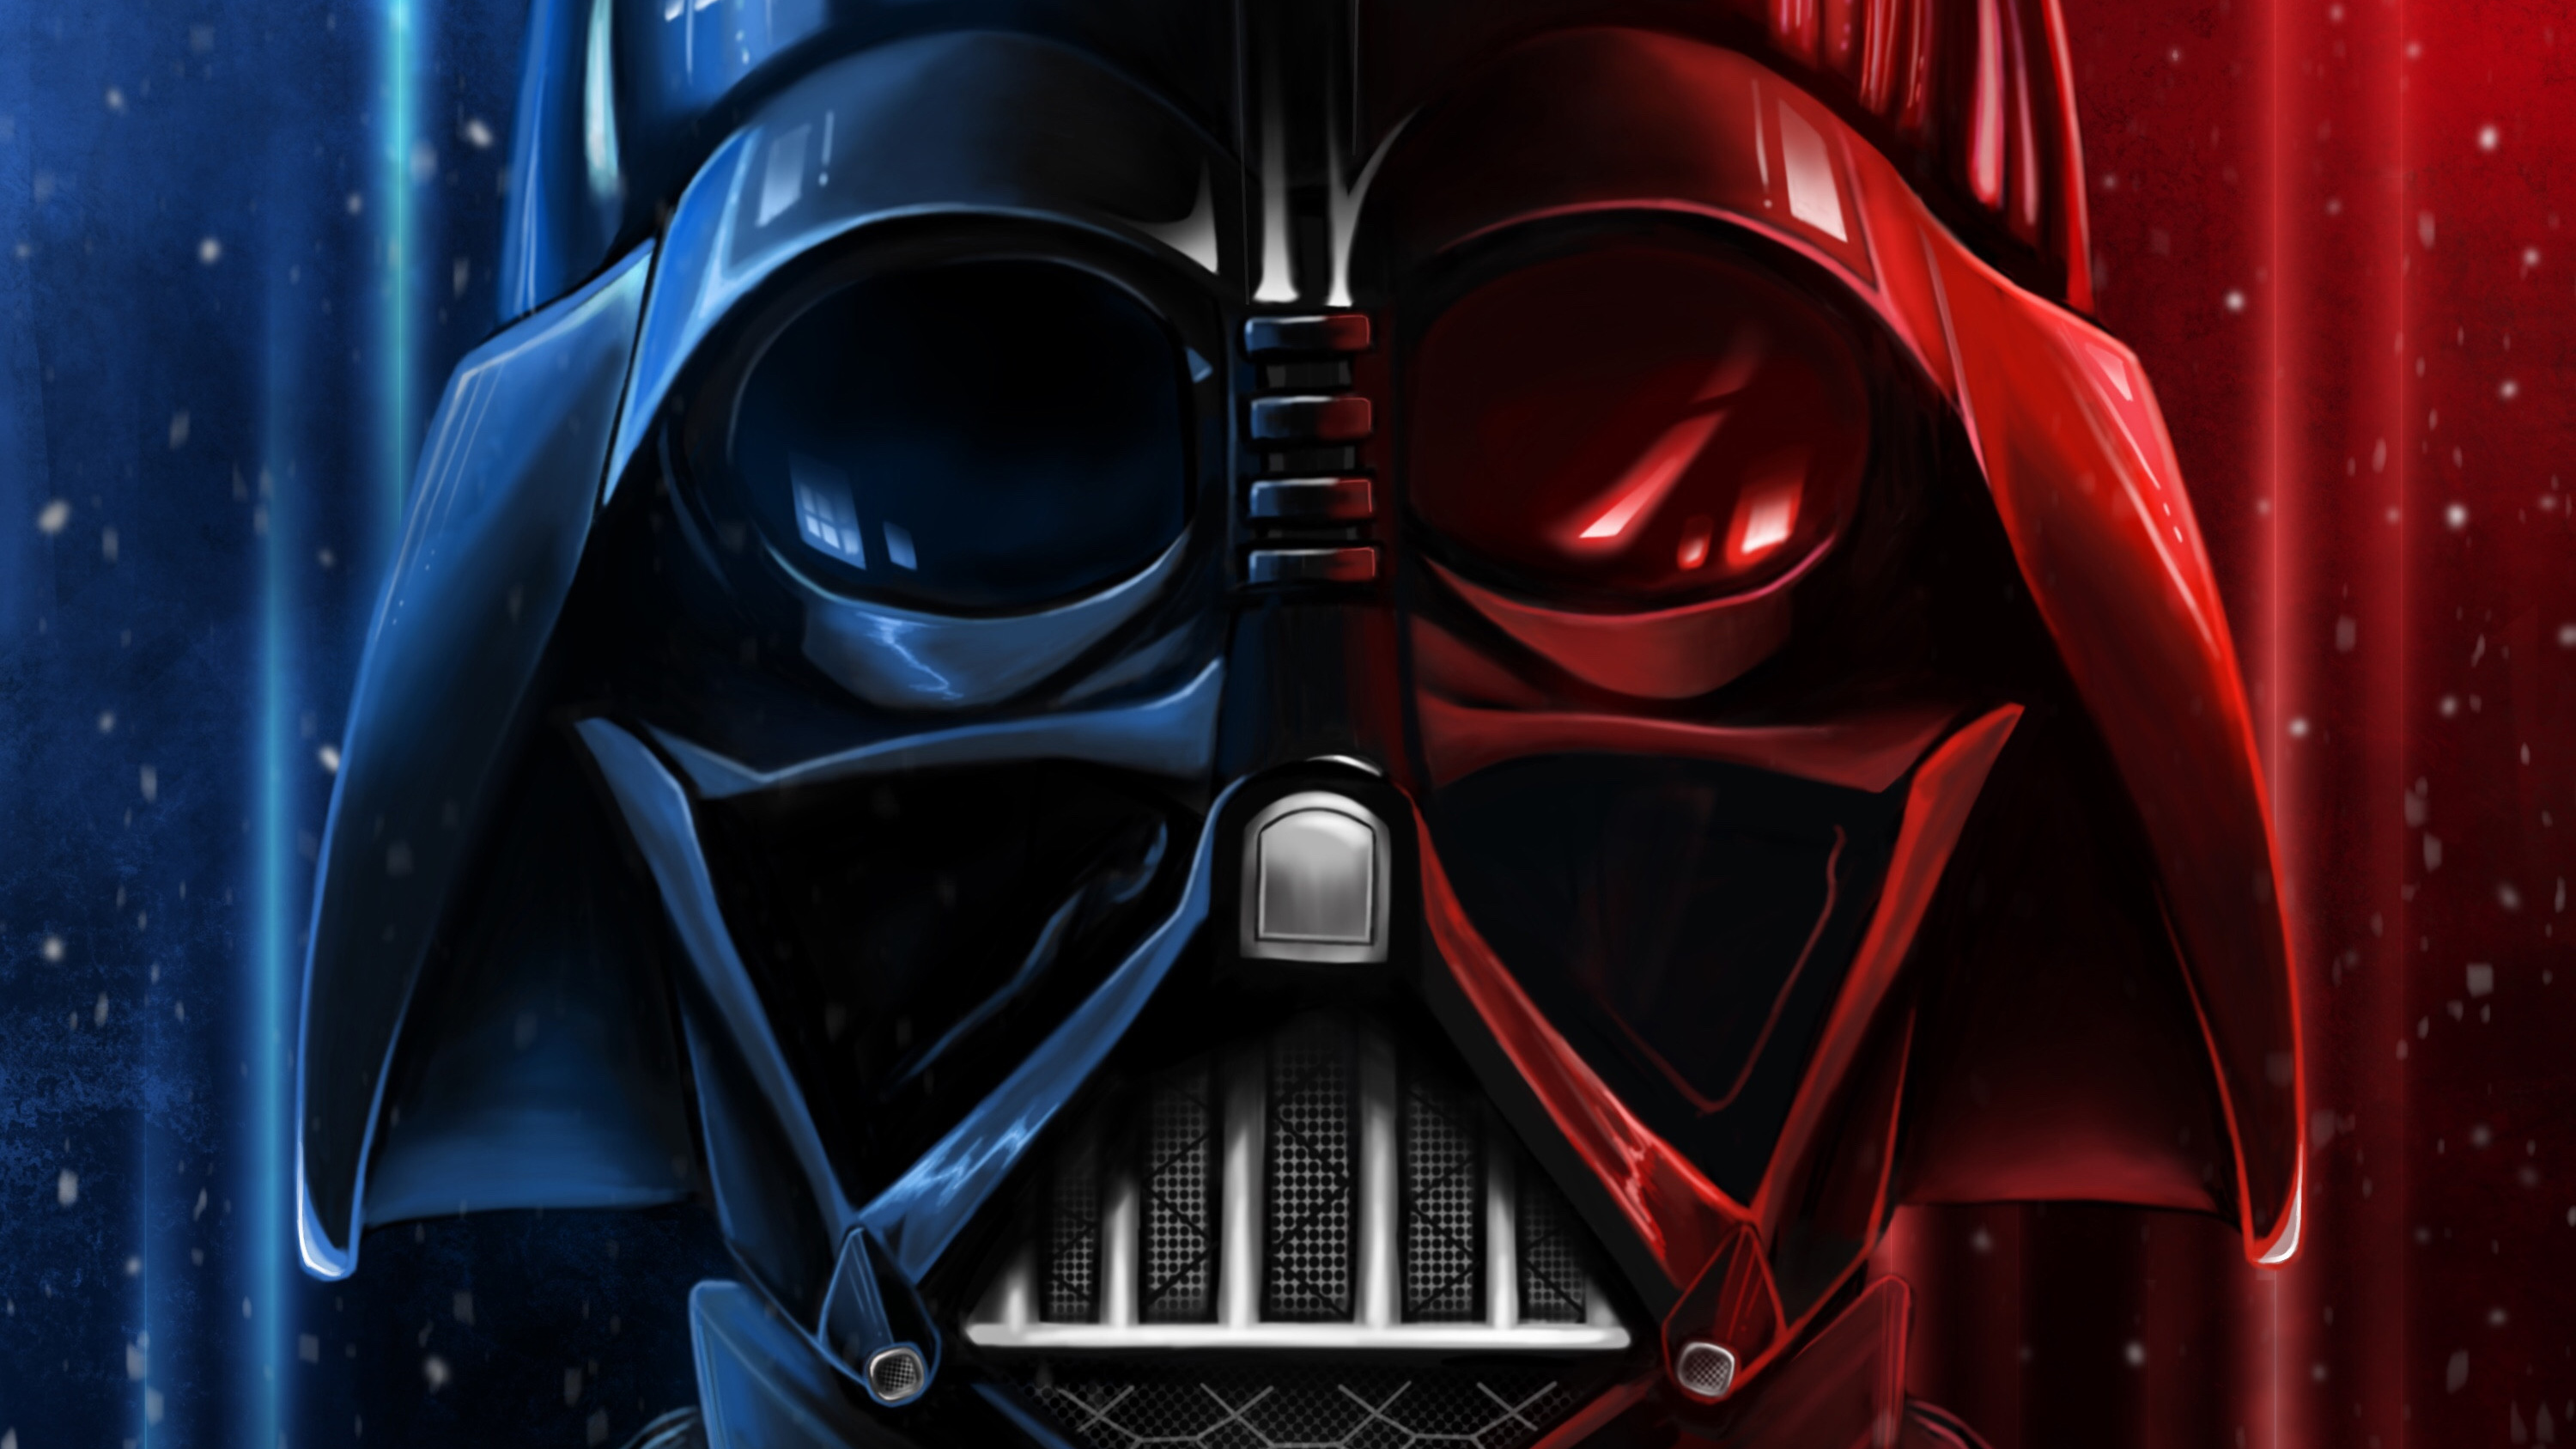 Darth Vader Wallpaper Red - A collection of the top 89 darth vader.